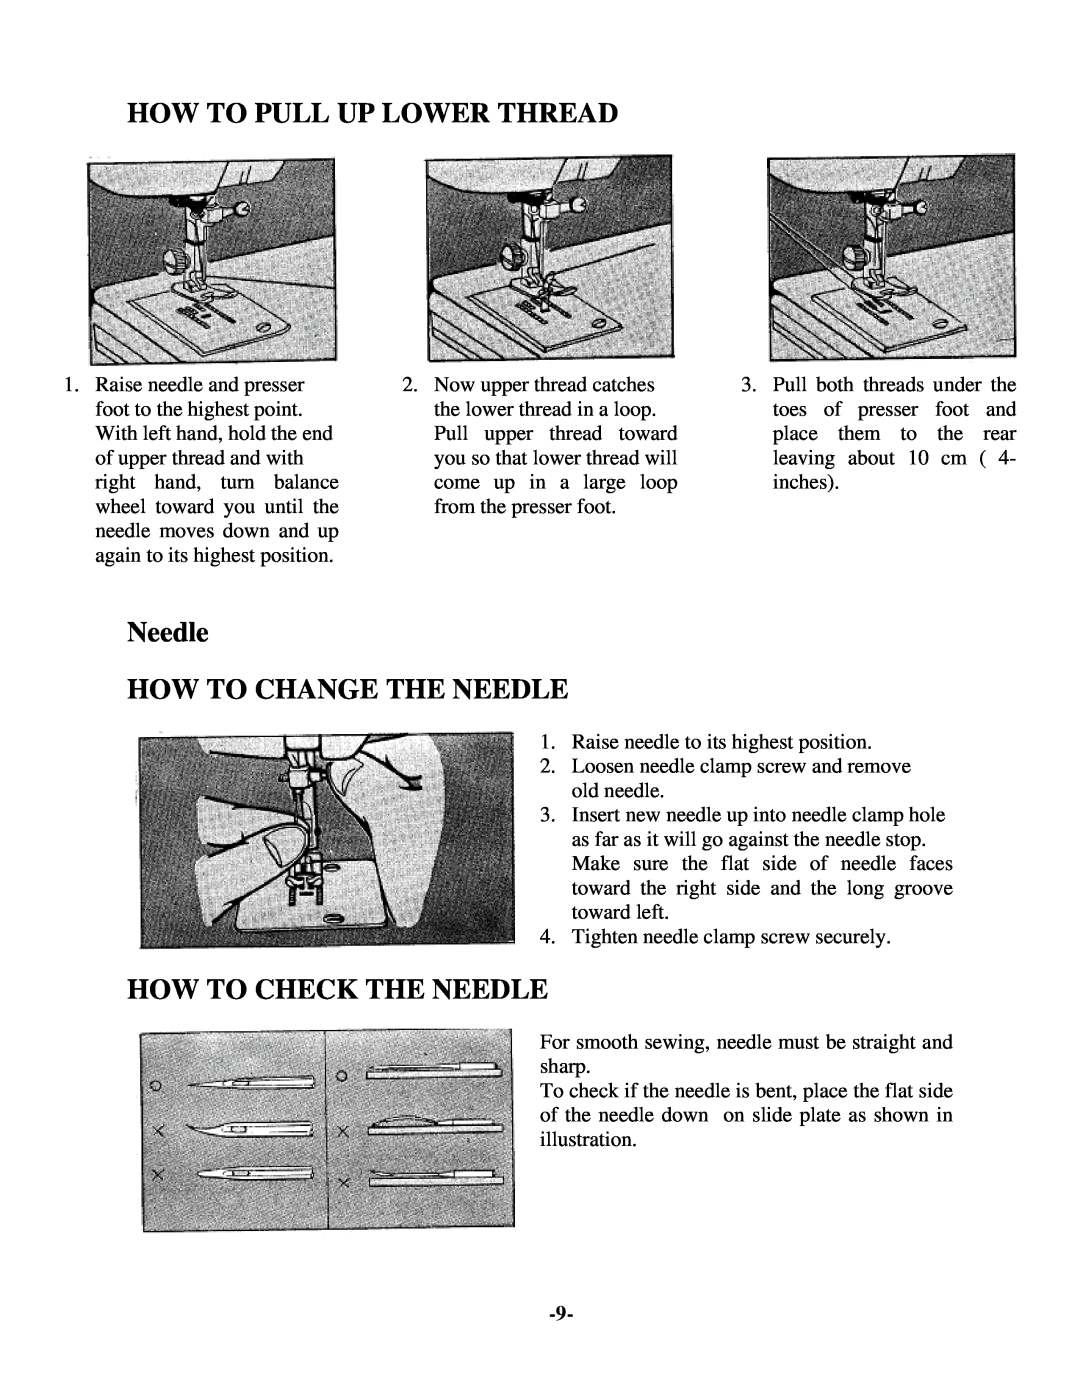 Brother 681B-UG manual How To Pull Up Lower Thread, Needle HOW TO CHANGE THE NEEDLE, How To Check The Needle 